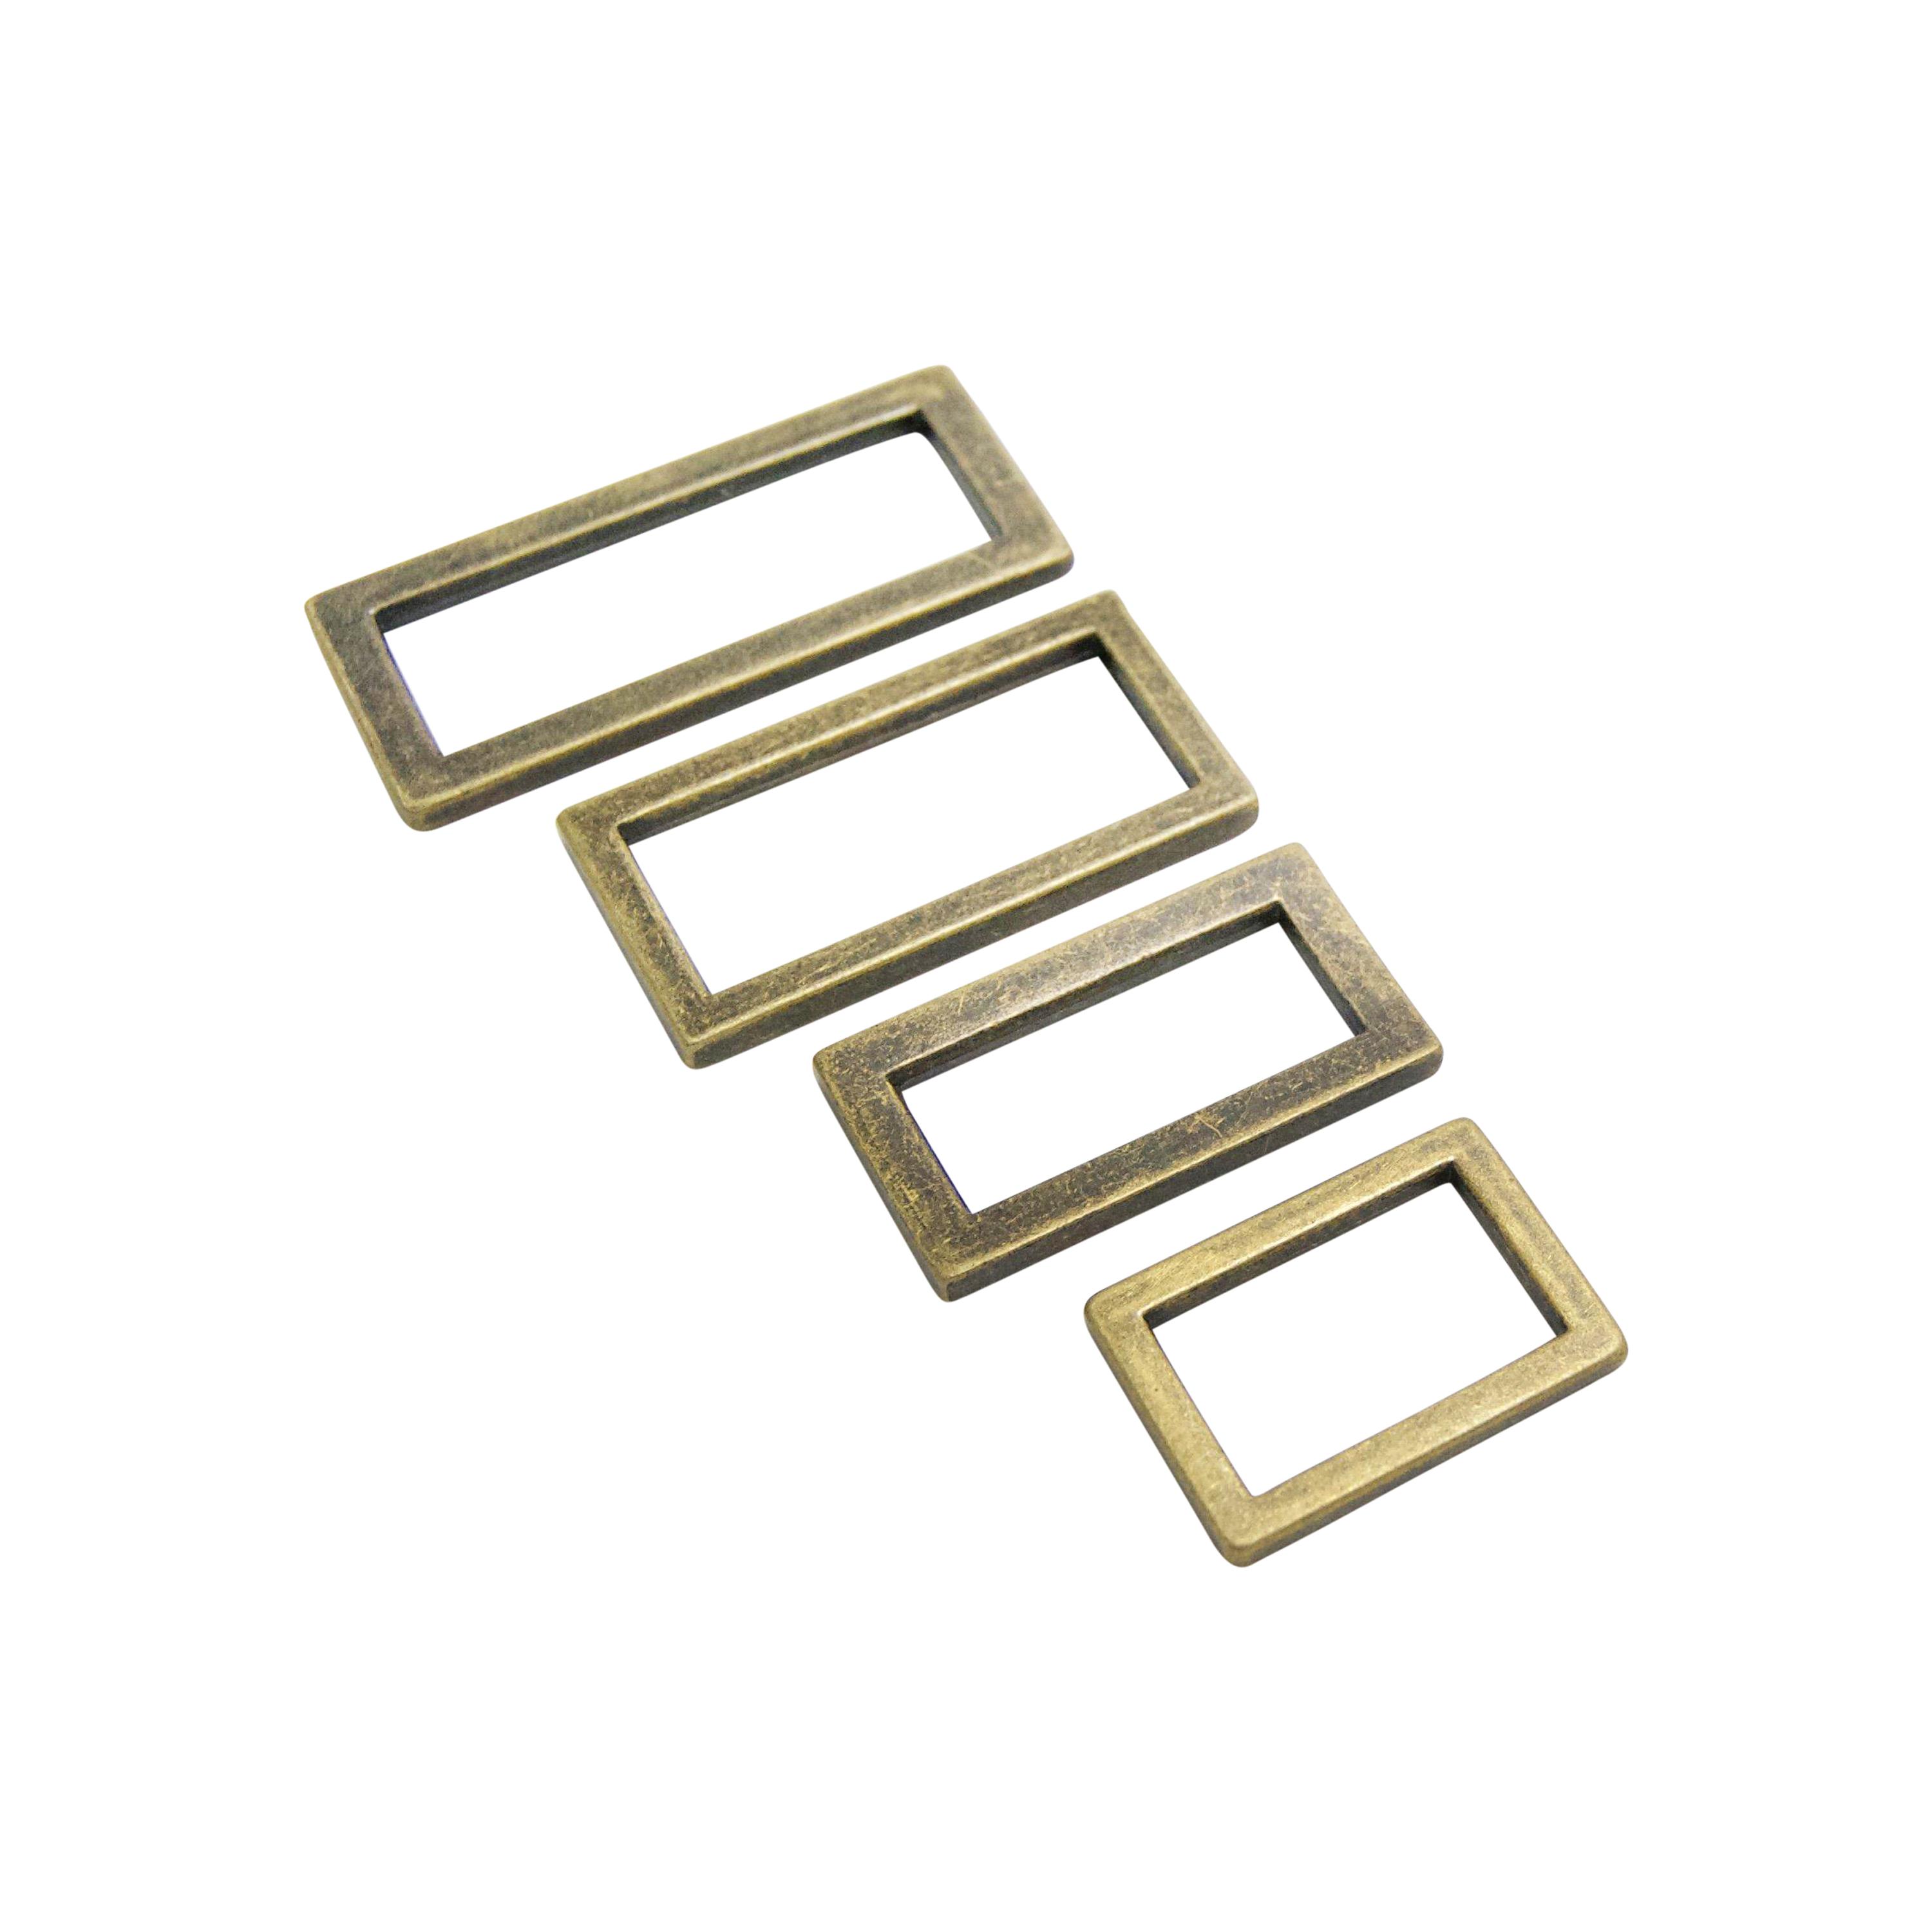 Antique Brass rectangle rings in 3 widths, 1" (25mm), 1 1/4" (32mm) and 1 1/2" (38mm), use these as connectors to attach bag handles